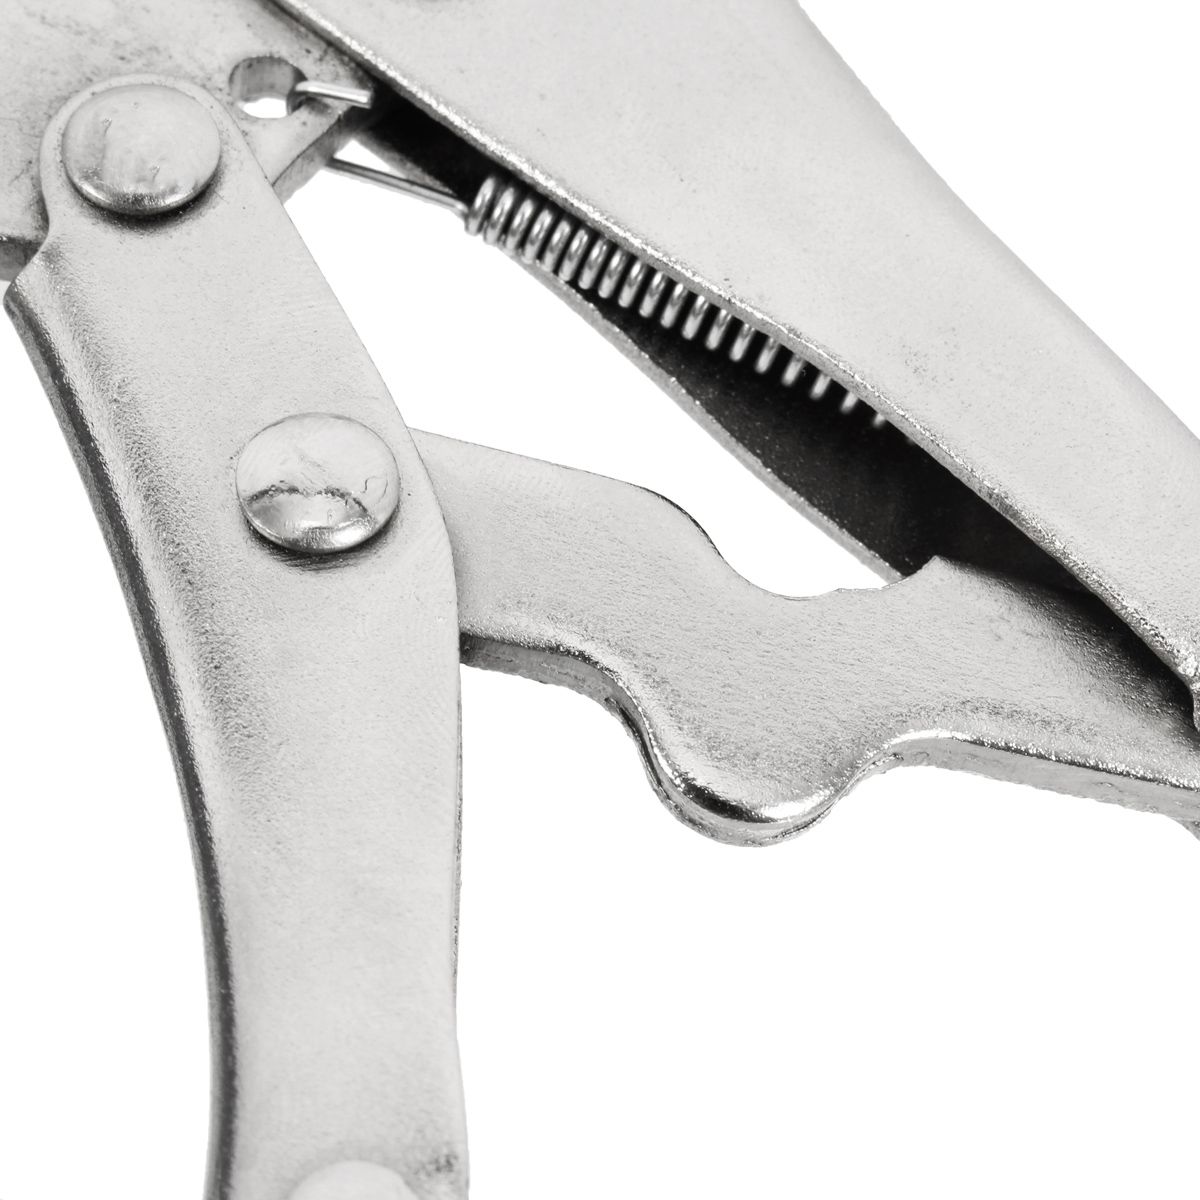 Vise-Grip-9DR-9inch-Deep-Locking-C-Clamp-Adjustable-Plier-With-Swivel-Pad-Vise-Jaw-1089460